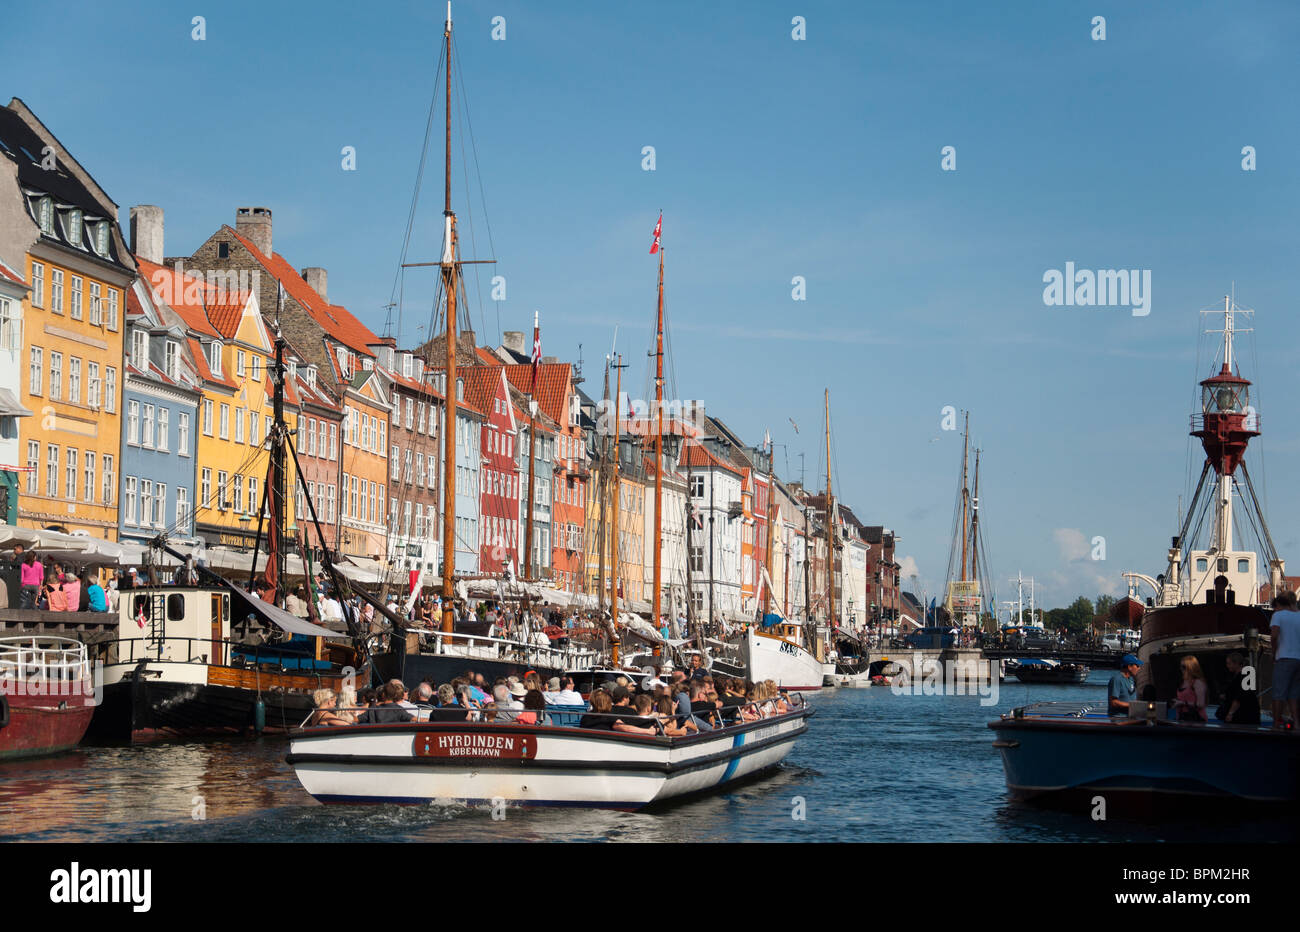 A view of the buildings and Nyhavn canal in Nyhavn Harbour, Copenhagen, Denmark. Stock Photo